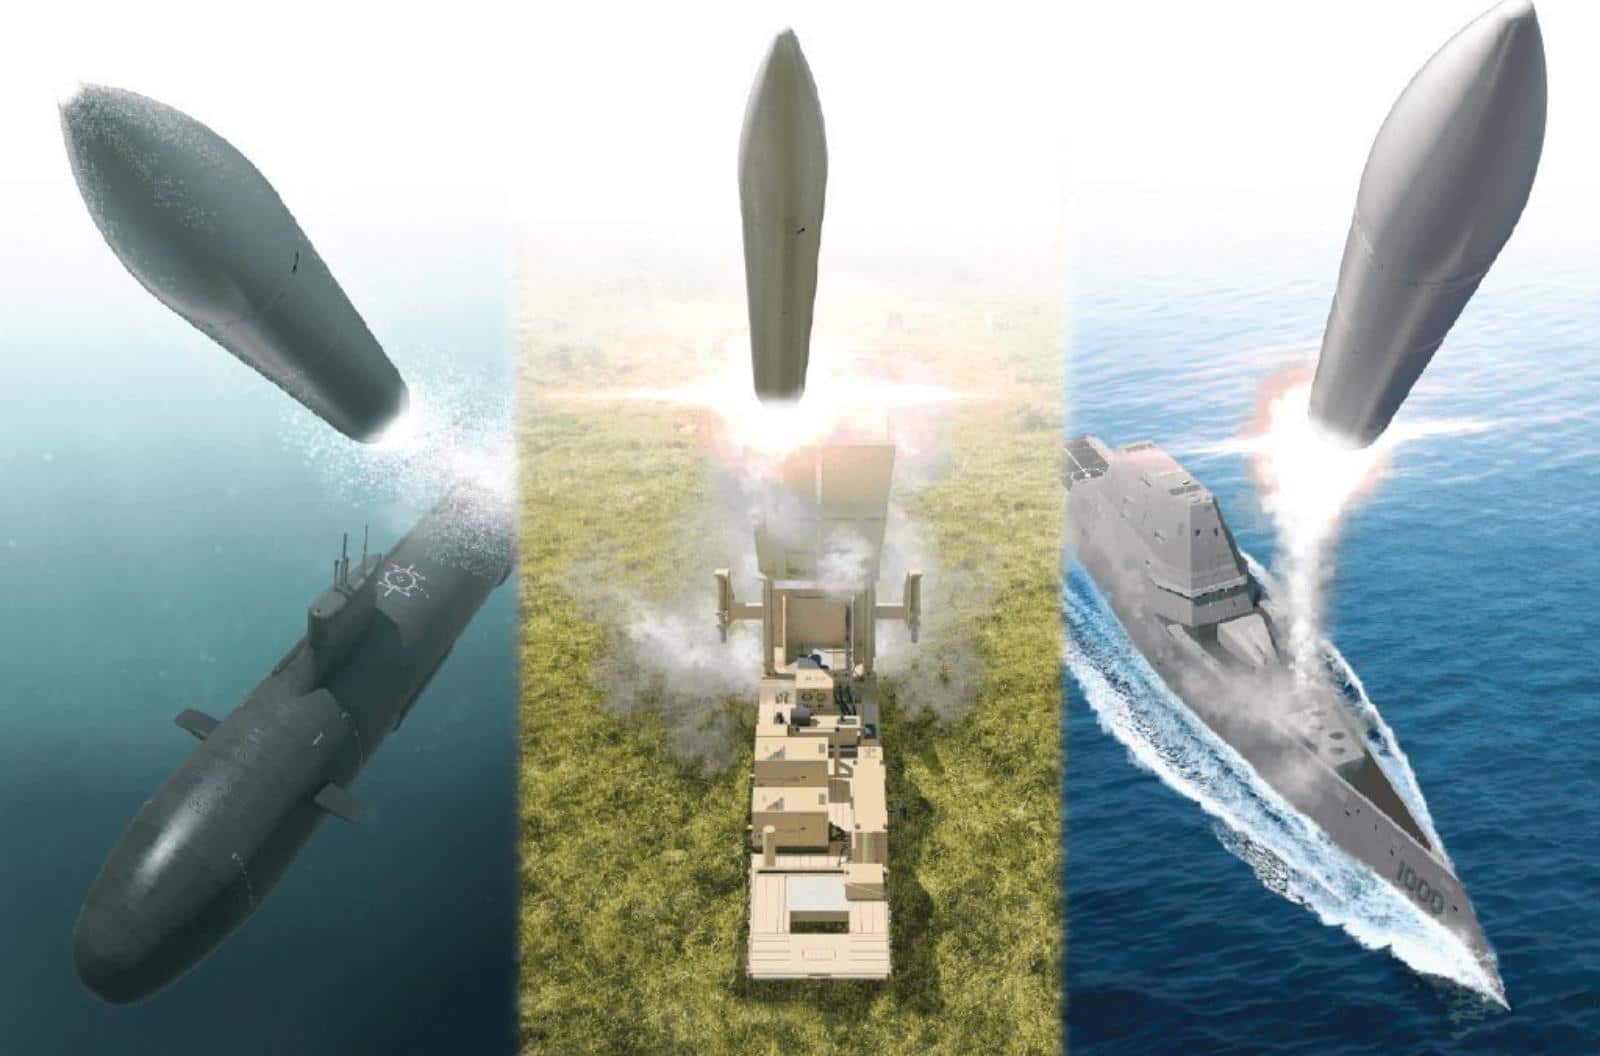 Graphics depicting hypersonic missiles on Zumwalt destroyers